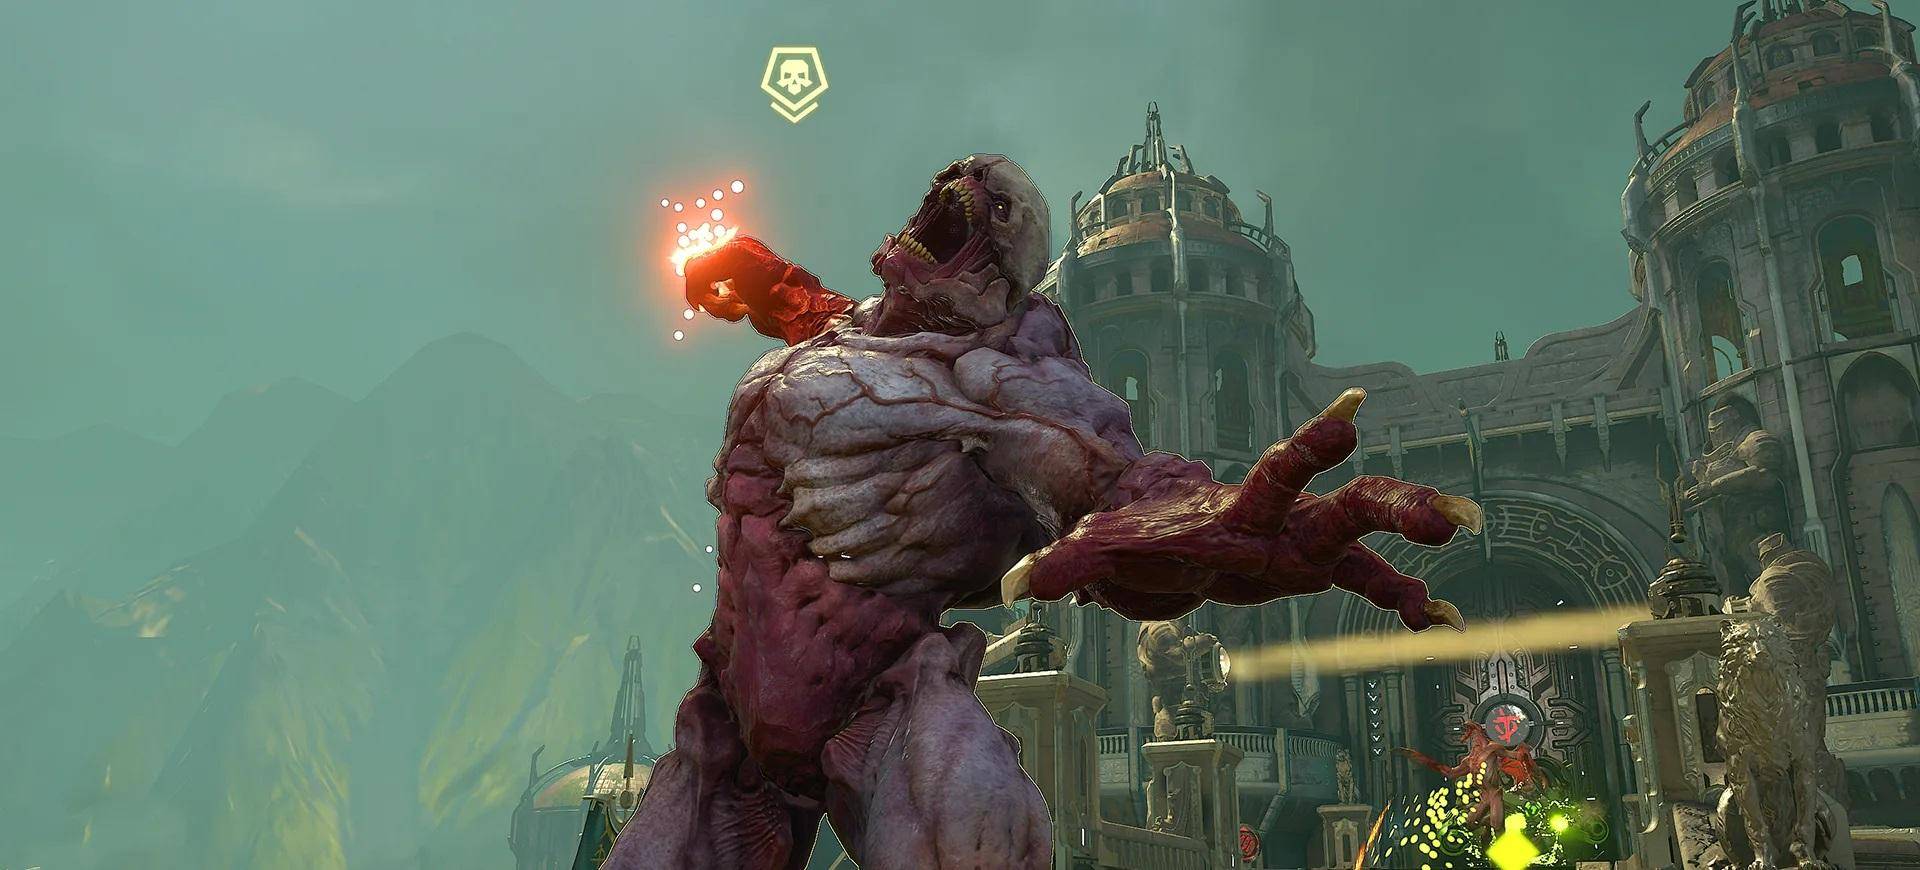 DOOM Eternal introduces more powerful demons in its new update